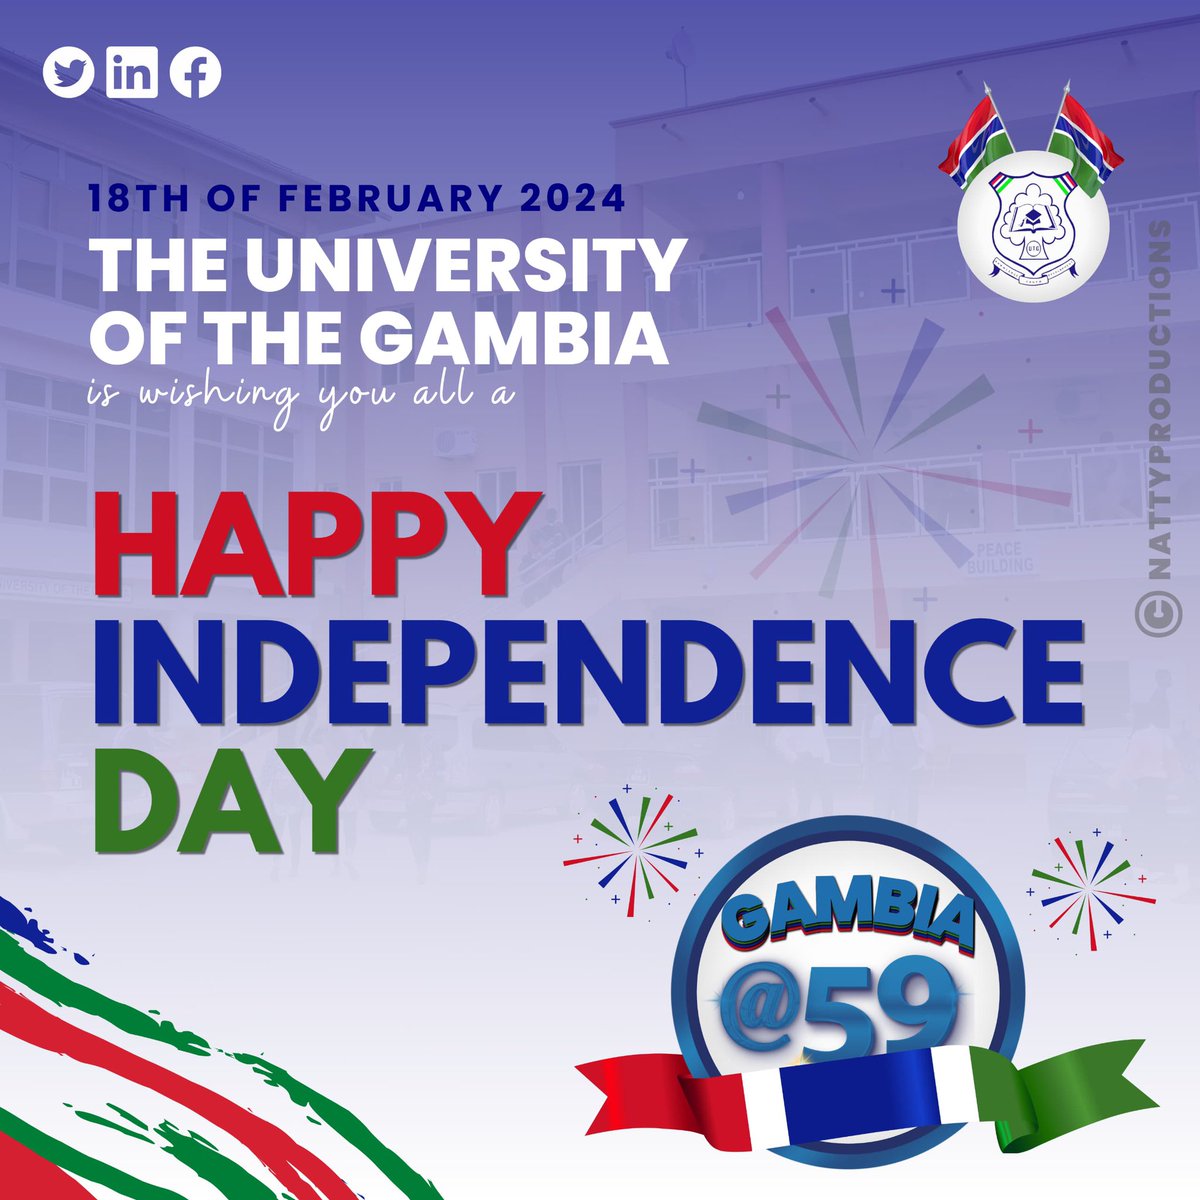 Happy 59th Independence Day to The Gambia! On this special occasion, we join our fellow Gambians in celebrating the journey of our beloved nation. Wishing everyone at home and abroad a day filled with joy, pride, and unity! 🇬🇲❤️ #GambiaIndependence #Gambia59